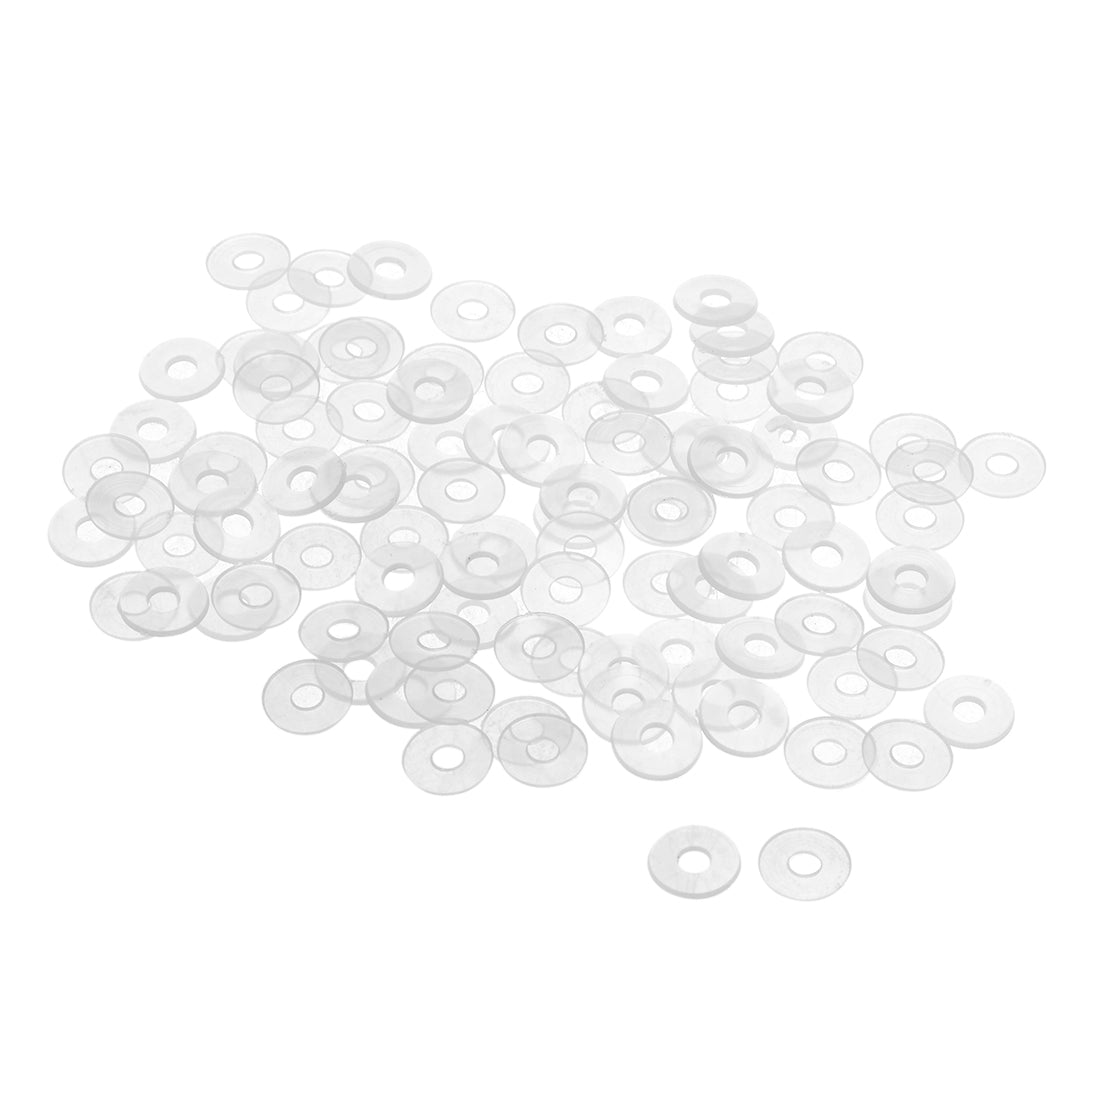 uxcell Uxcell White Nylon Flat Washers for Screws Bolts 100PCS